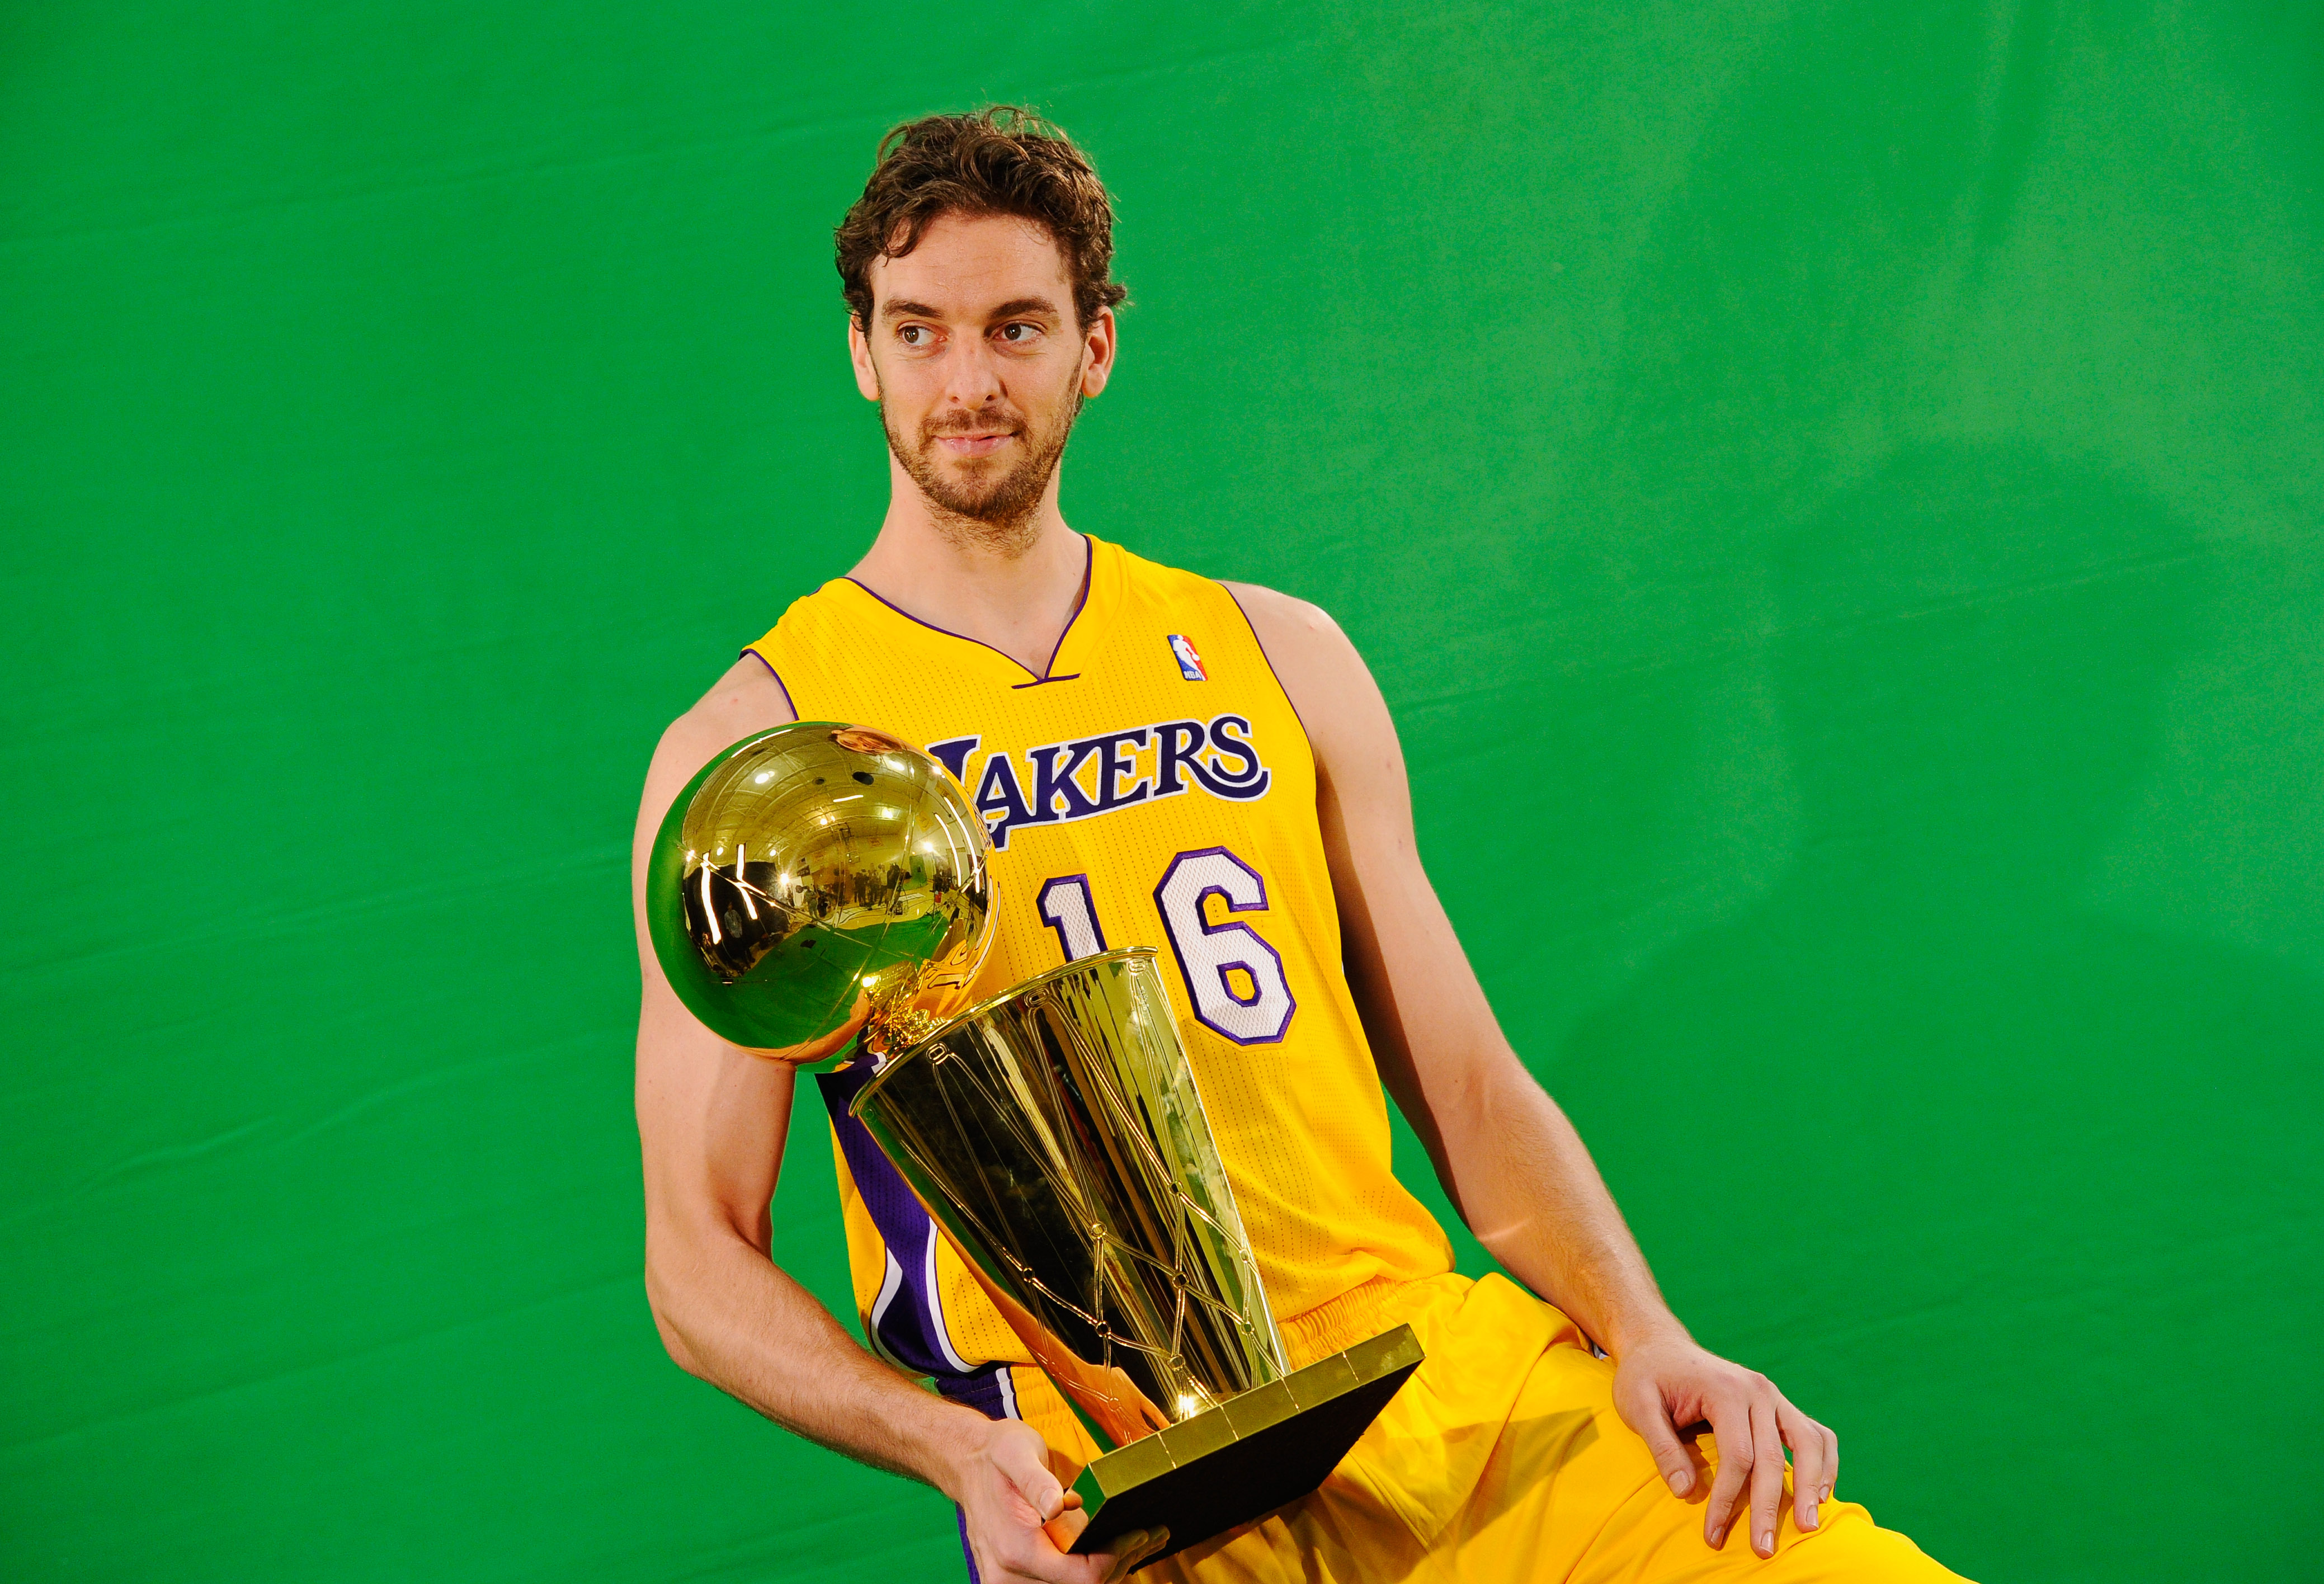 EL SEGUNDO, CA - SEPTEMBER 25:  Pau Gasol #16 of the Los Angeles Lakers poses for a photograph with the NBA Finals Larry O'Brien Championship Trophy during Media Day at the Toyota Center on September 25, 2010 in El Segundo, California. NOTE TO USER: User